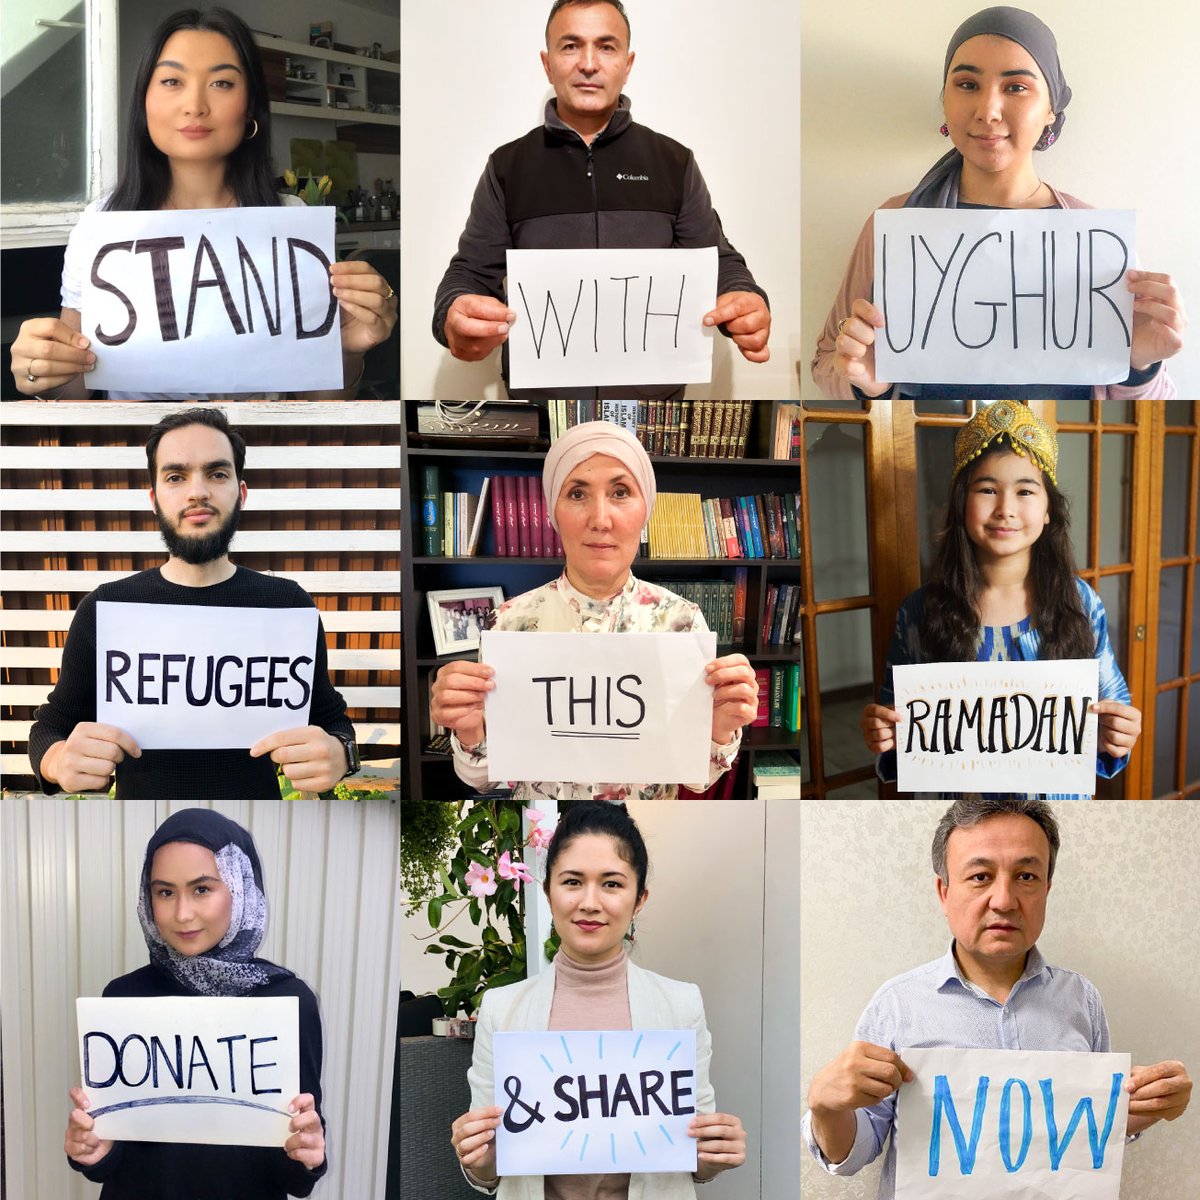 Day 7 of  #30Days30Causes: +1 million Uyghurs have been placed in concentration camps in China. However, many of those who've managed to leave and have become refugees, face poverty, psychological trauma, unemployment, and lack of medical support  https://www.launchgood.com/campaign/uyghur_ramadan_relief?src=LG-OptinUyghurCovid#!/